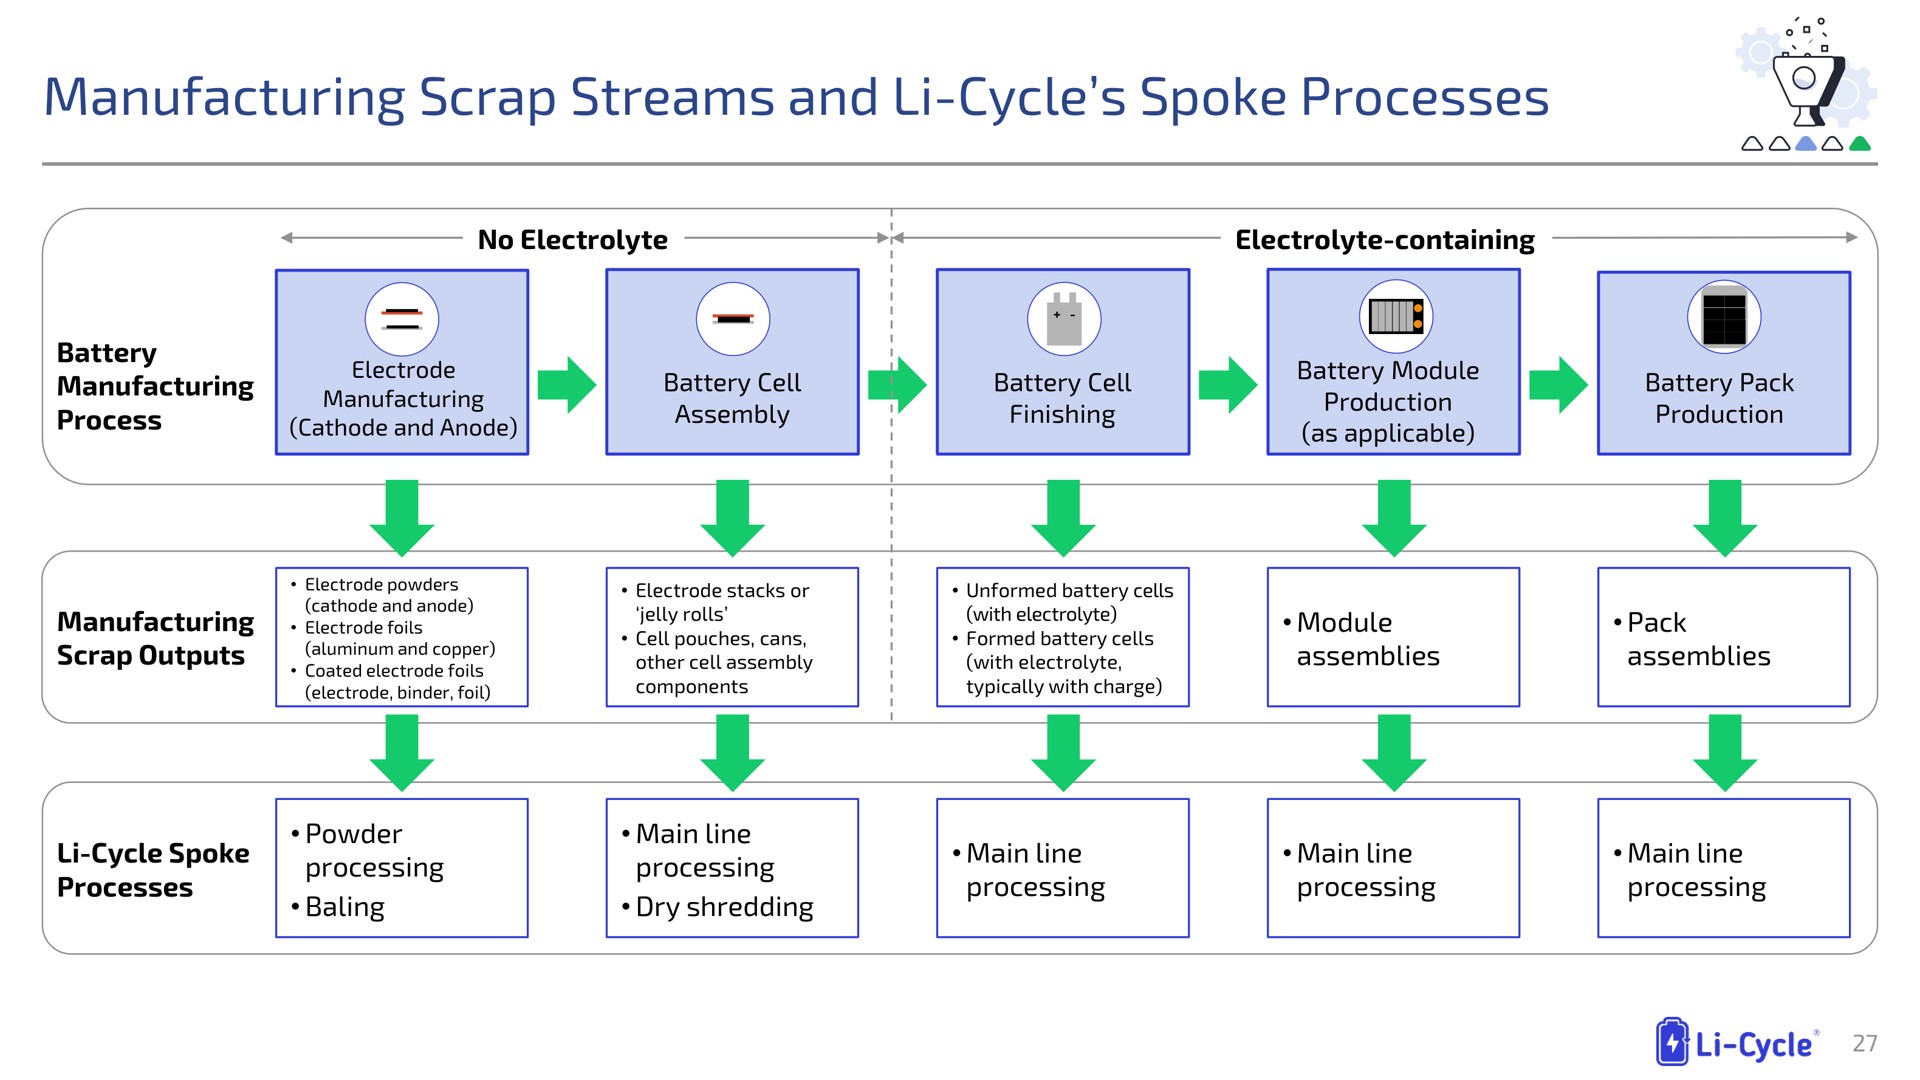 manufacturing scrap streams and cycle spoke processes poe am if | Li-Cycle